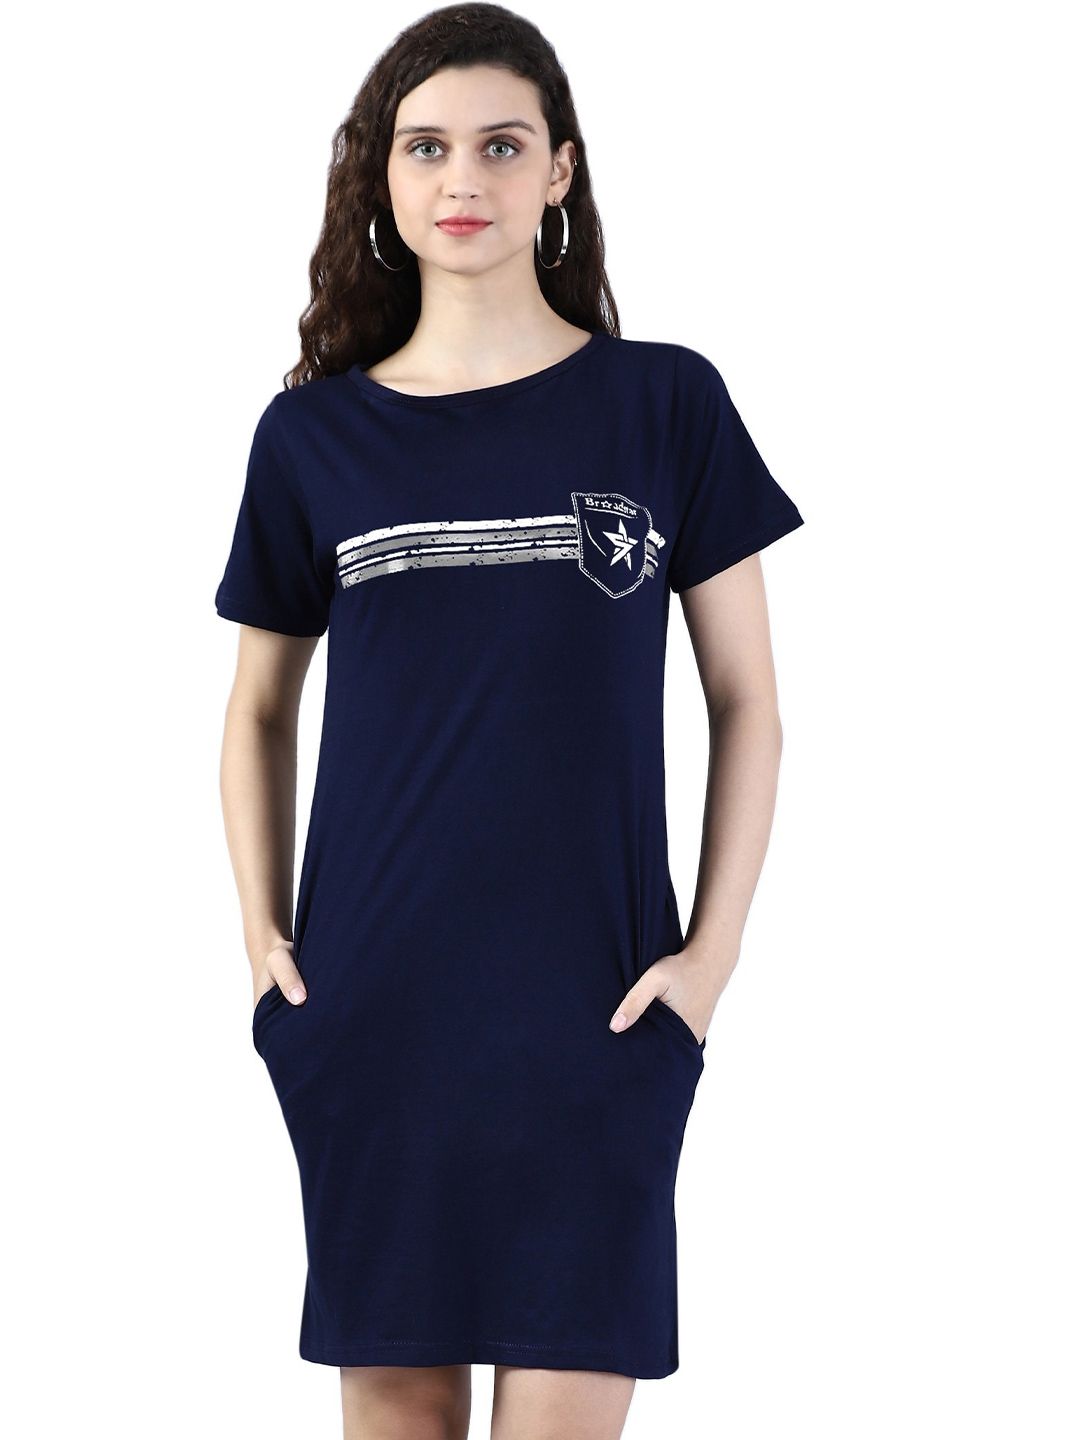 Next One Women Navy Blue Typography Extended Sleeves Pockets T-shirt Price in India